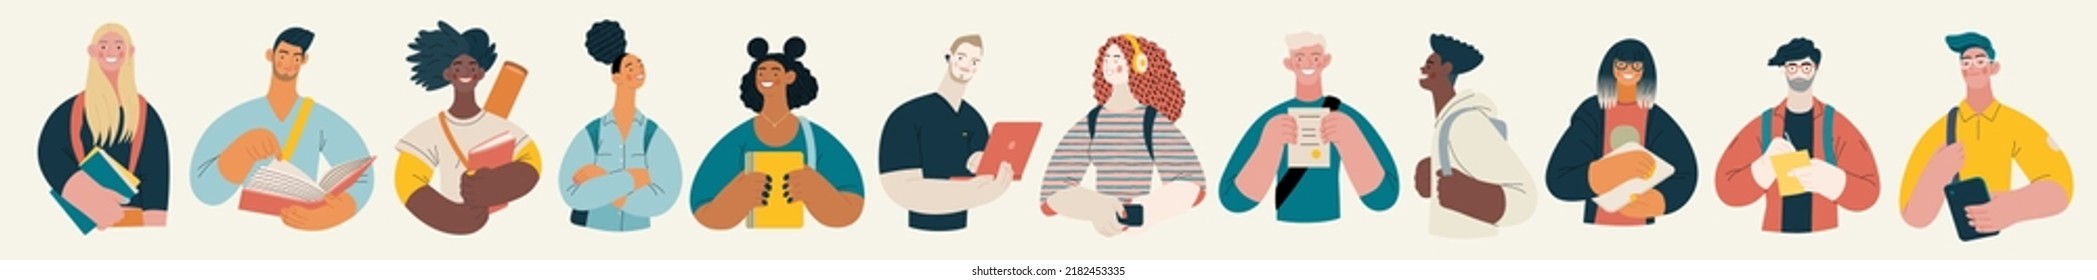 People portrait - Students -Modern flat vector concept illustration of a young male and female students, half-length portrait, user avatar. Creative landing web page template